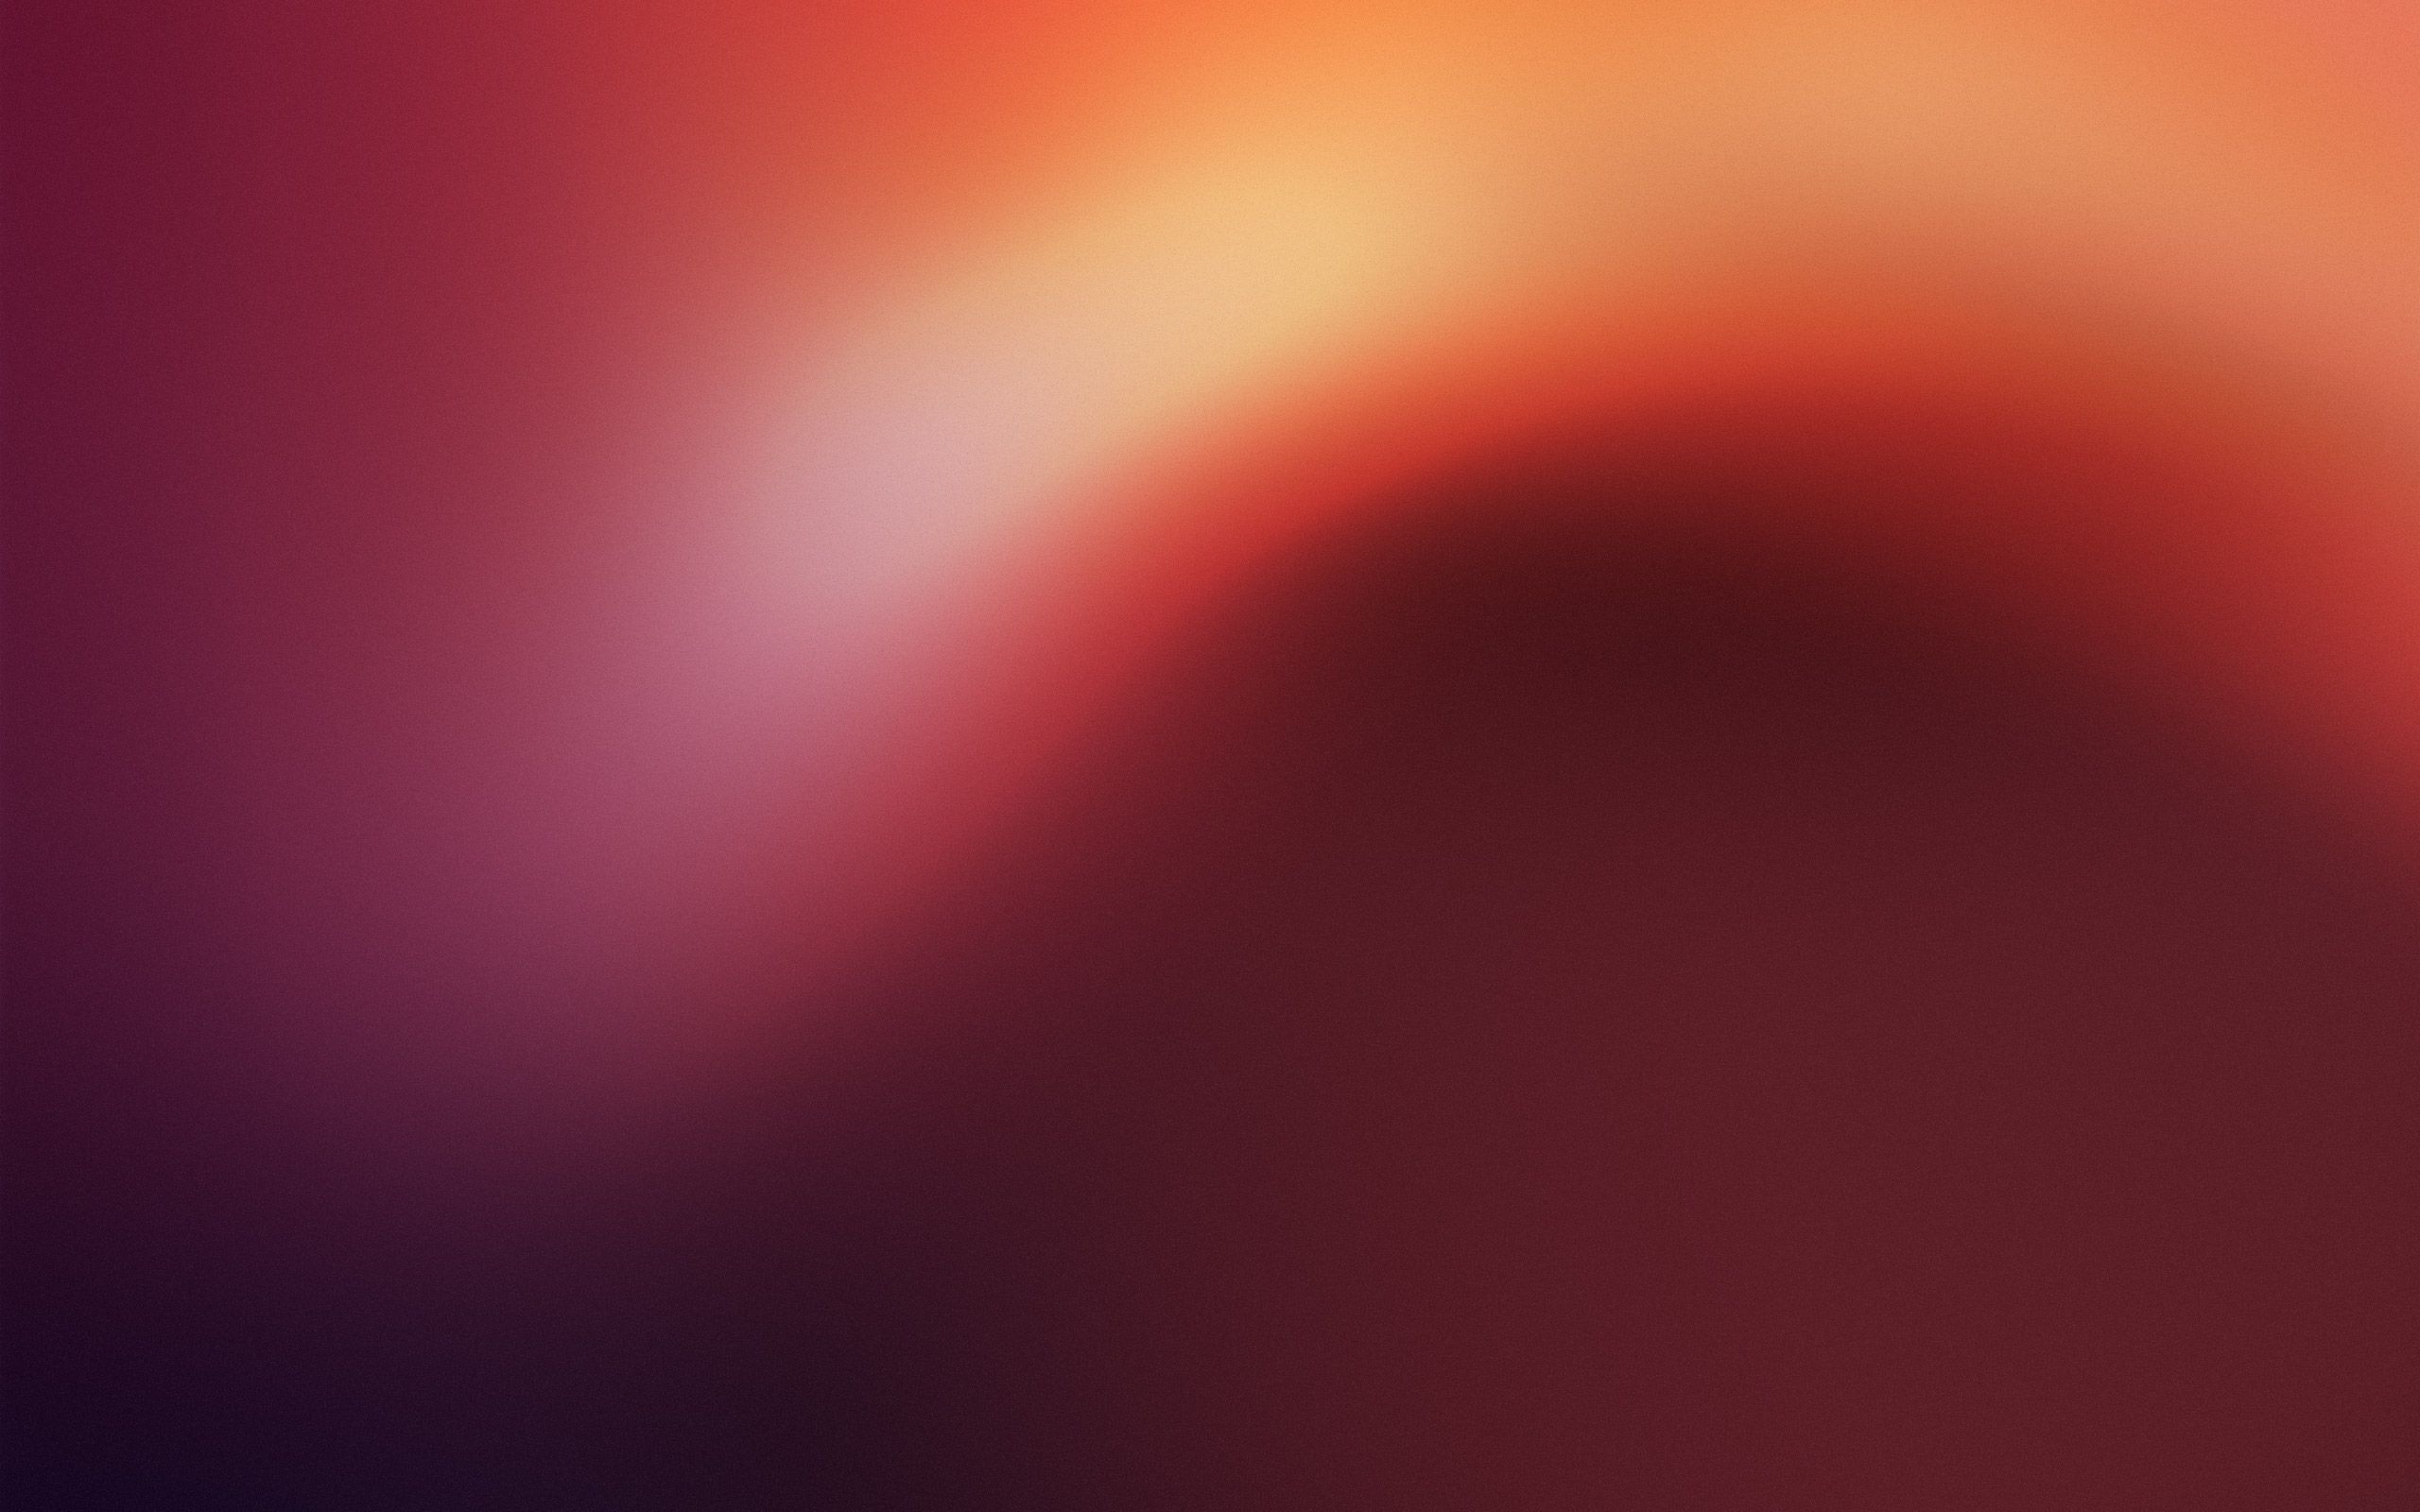 This Is Every Default Ubuntu Wallpaper From 4.10 to 15.04